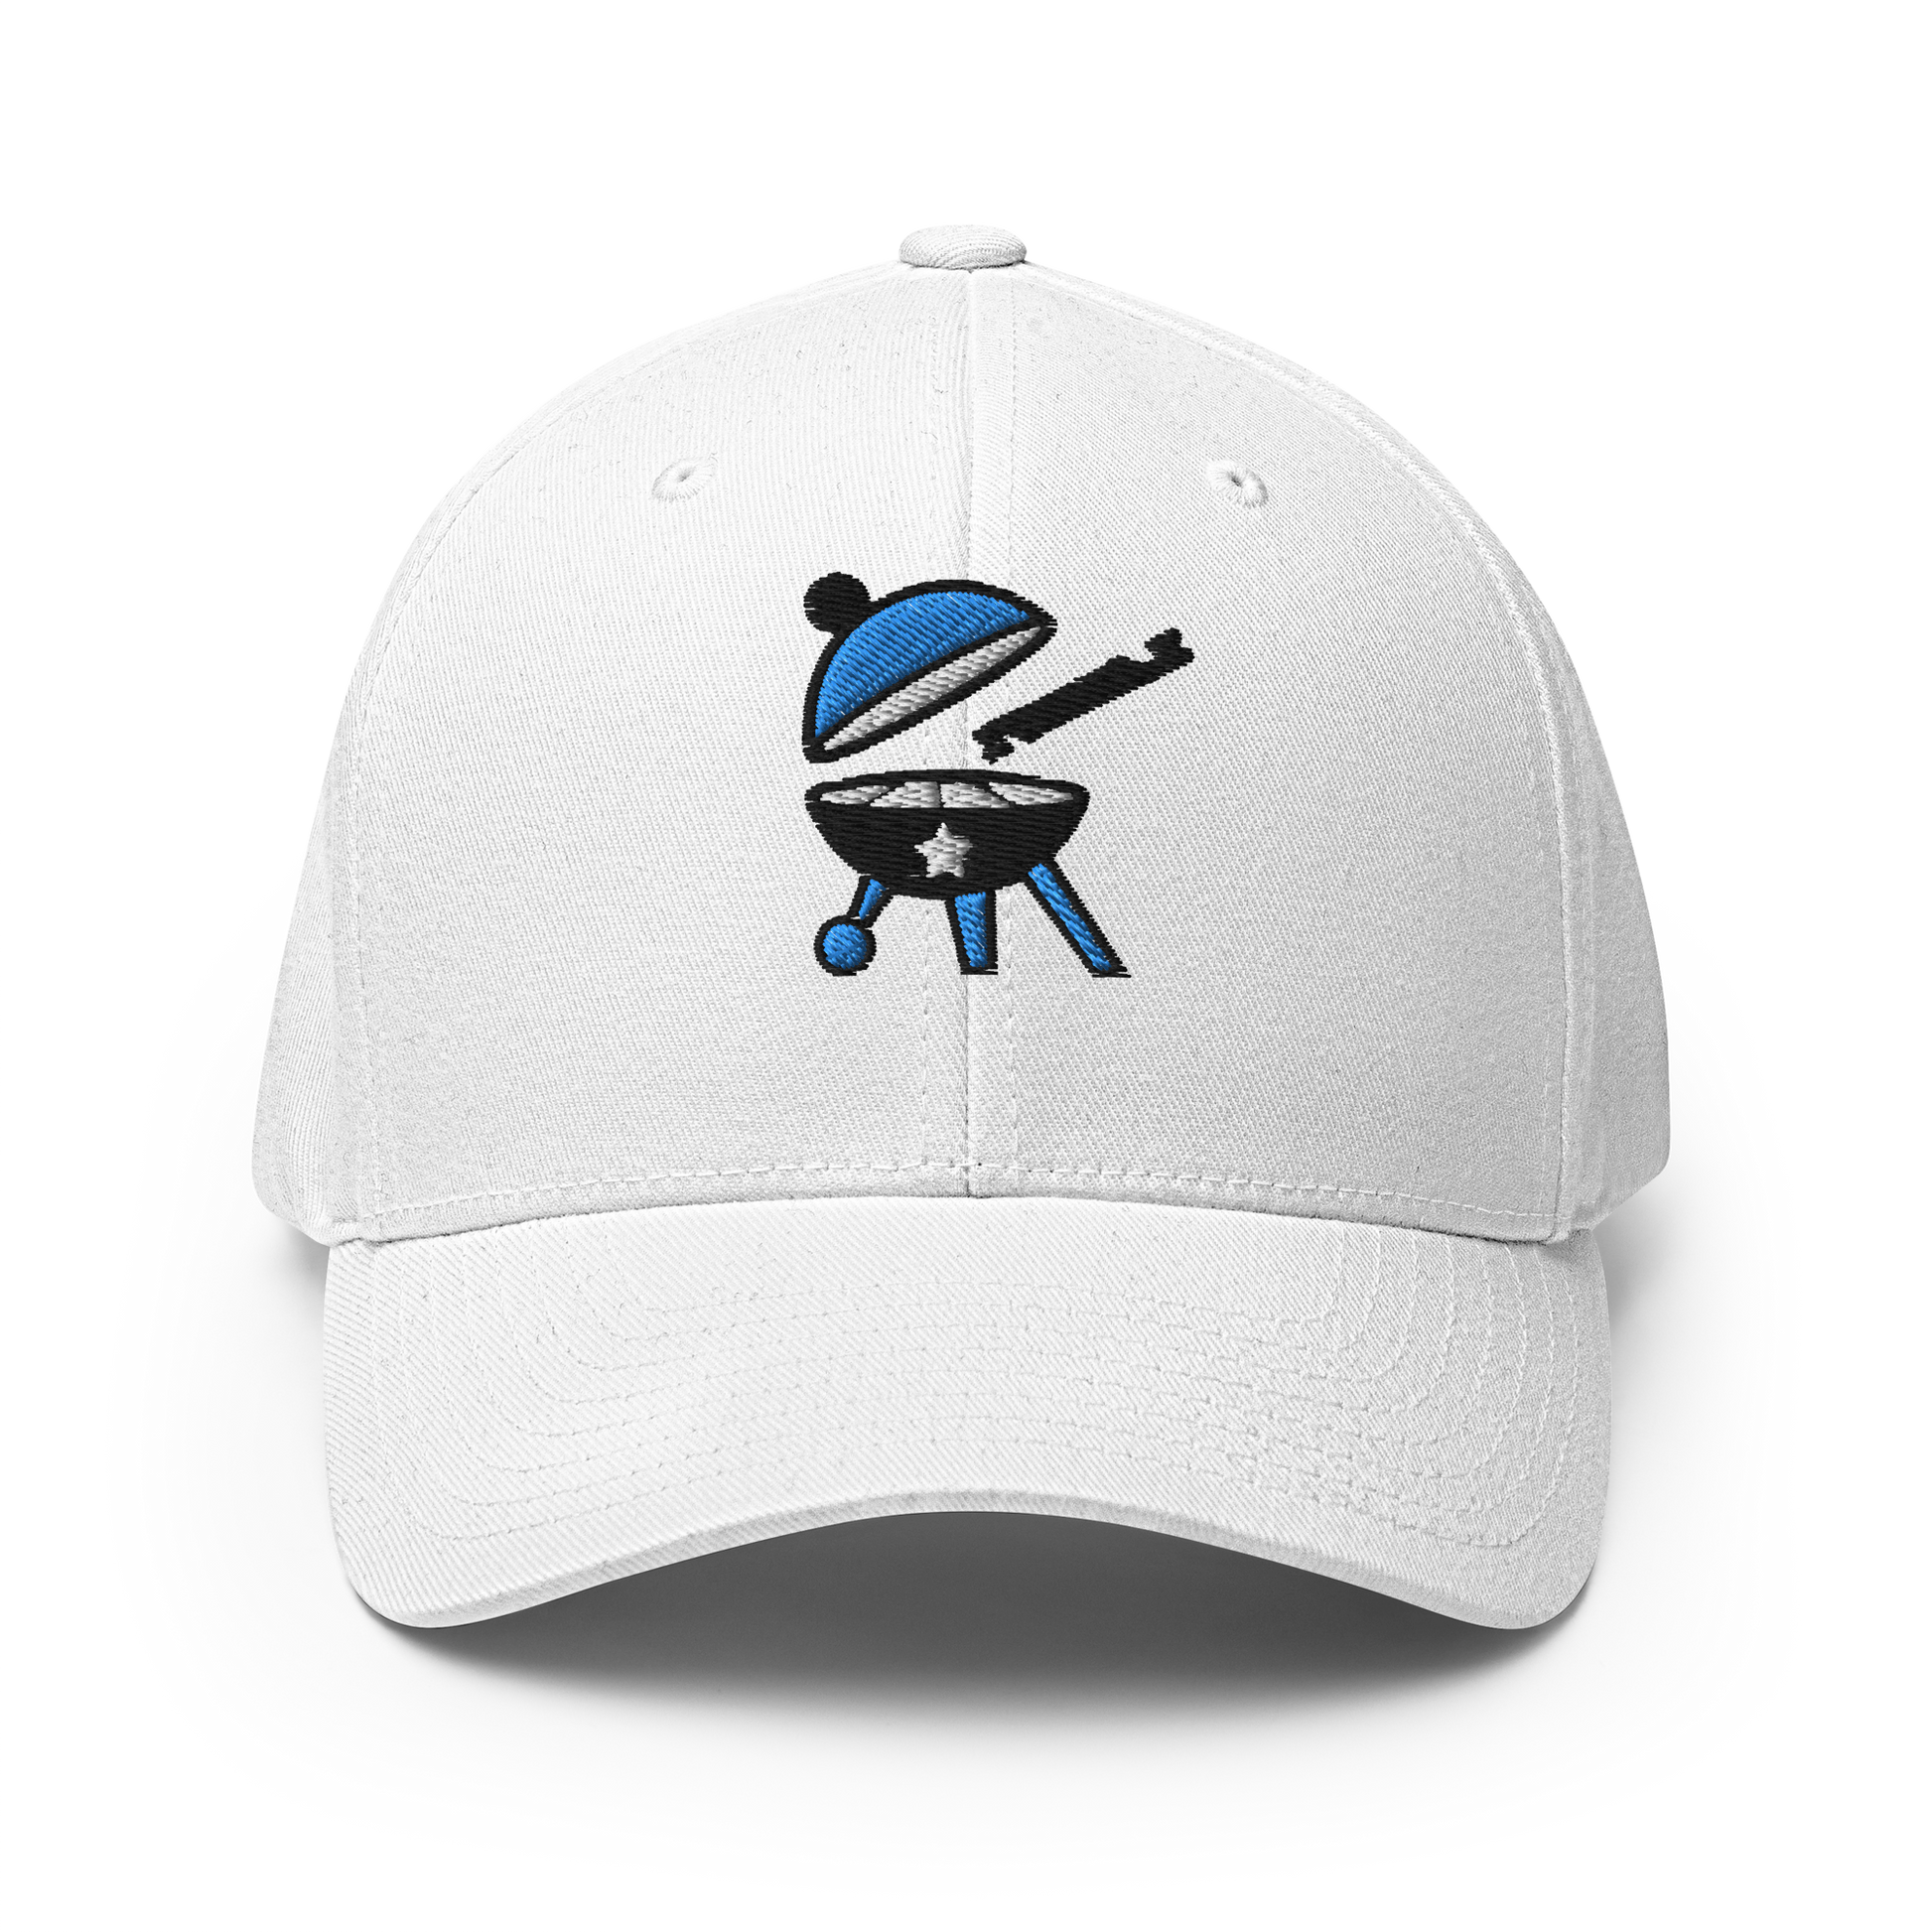 White baseball cap with the BBQ Pic logo on it which is a round, open BBQ with a BBQ Pic about to clean it.